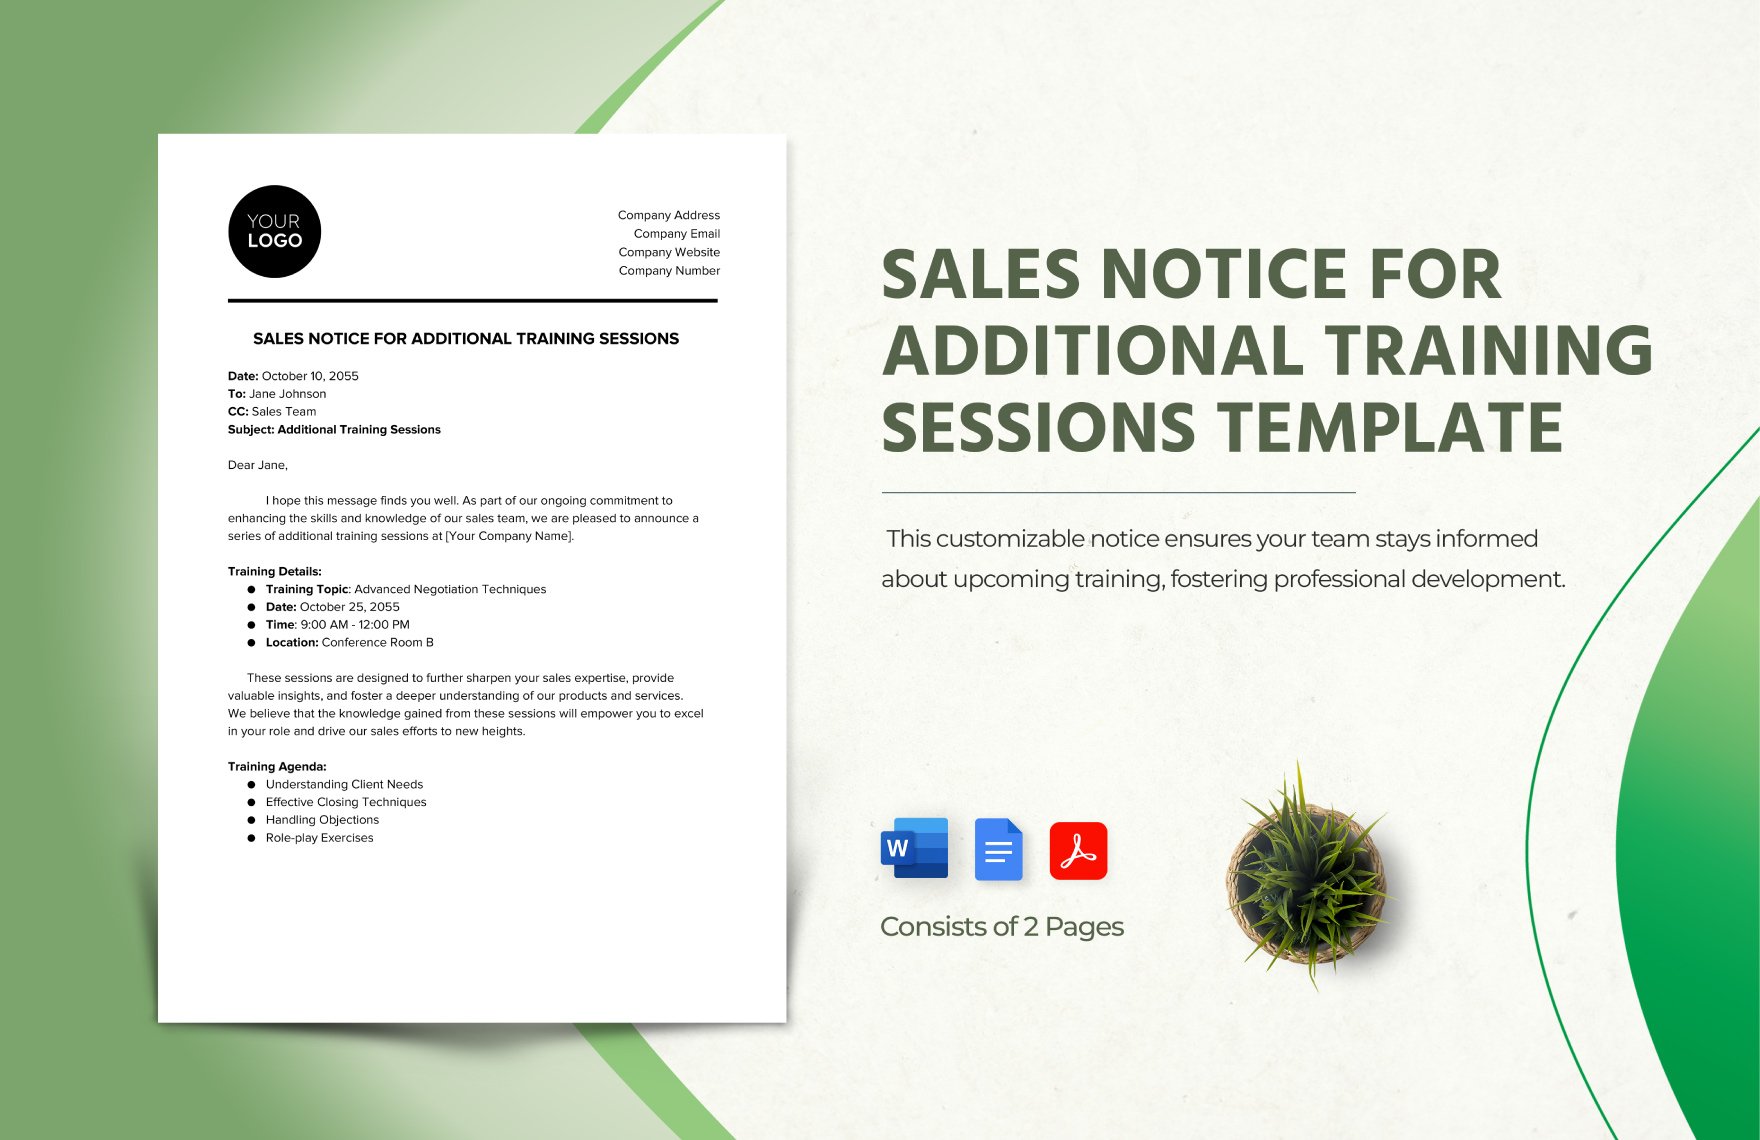 Sales Notice for Additional Training Sessions Template